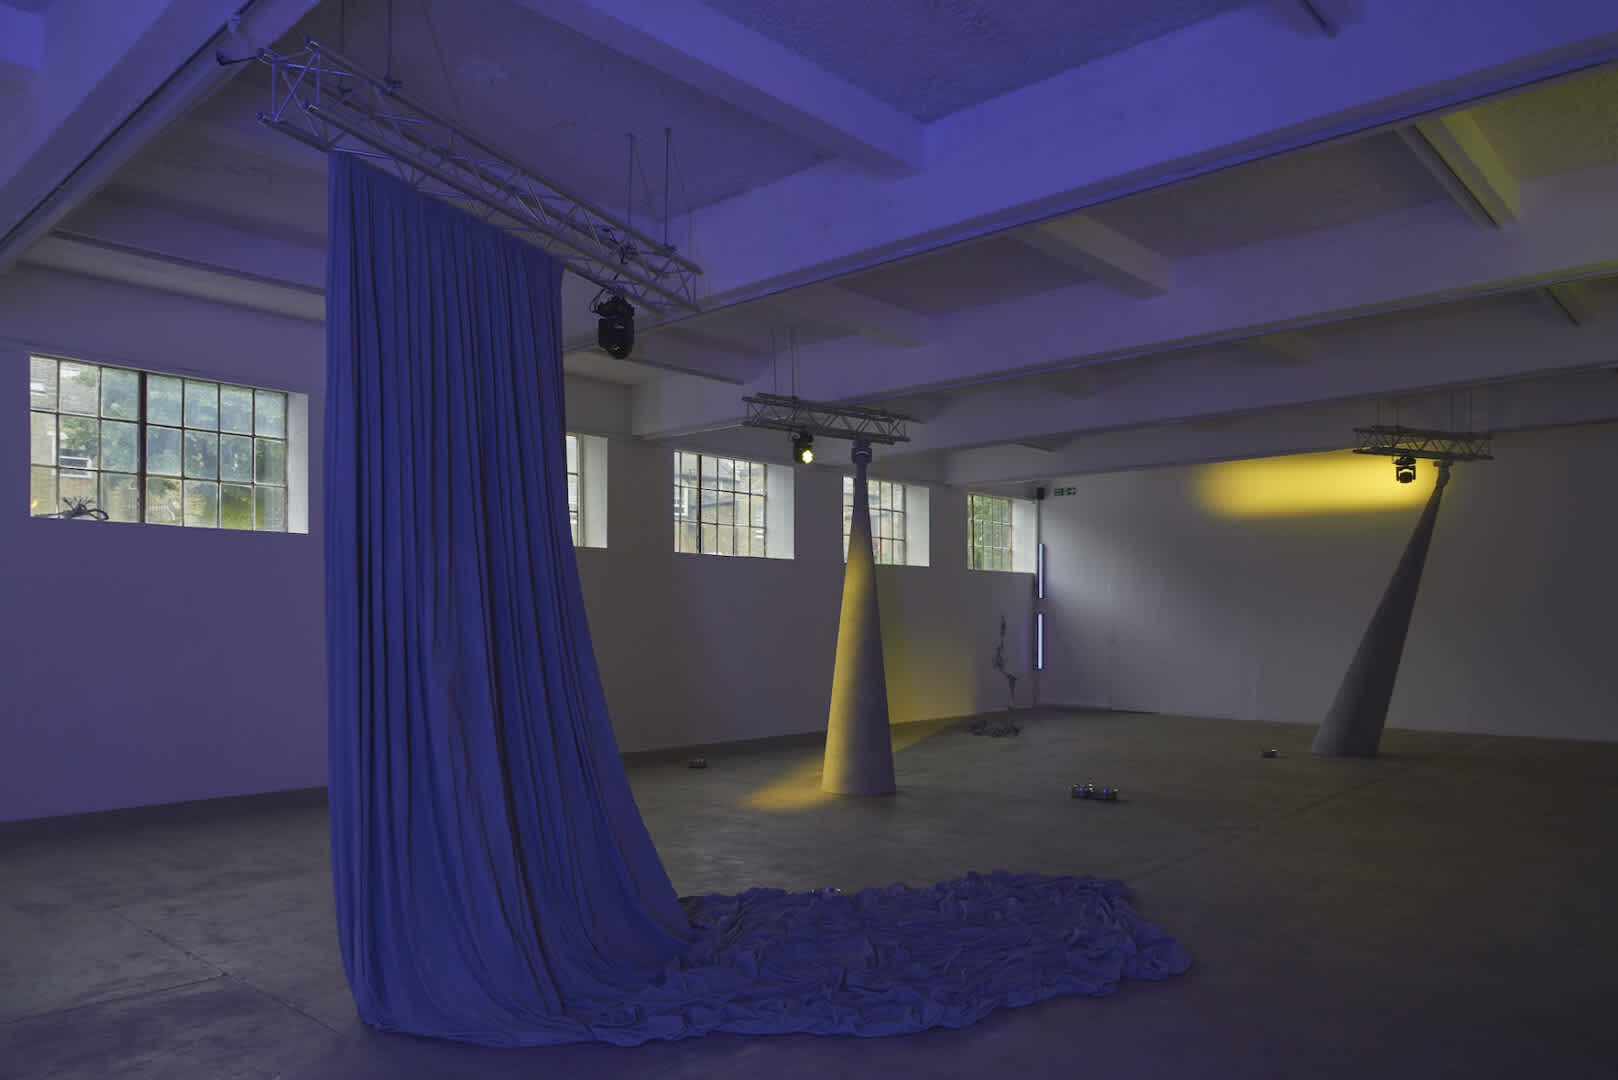 Nikita Gale, CCCIRCCCE (2022). Installation view, Chisenhale Gallery, London, 2022. Commissioned and produced by Chisenhale Gallery, London. Courtesy of the artist. Photo: Andy Keate.